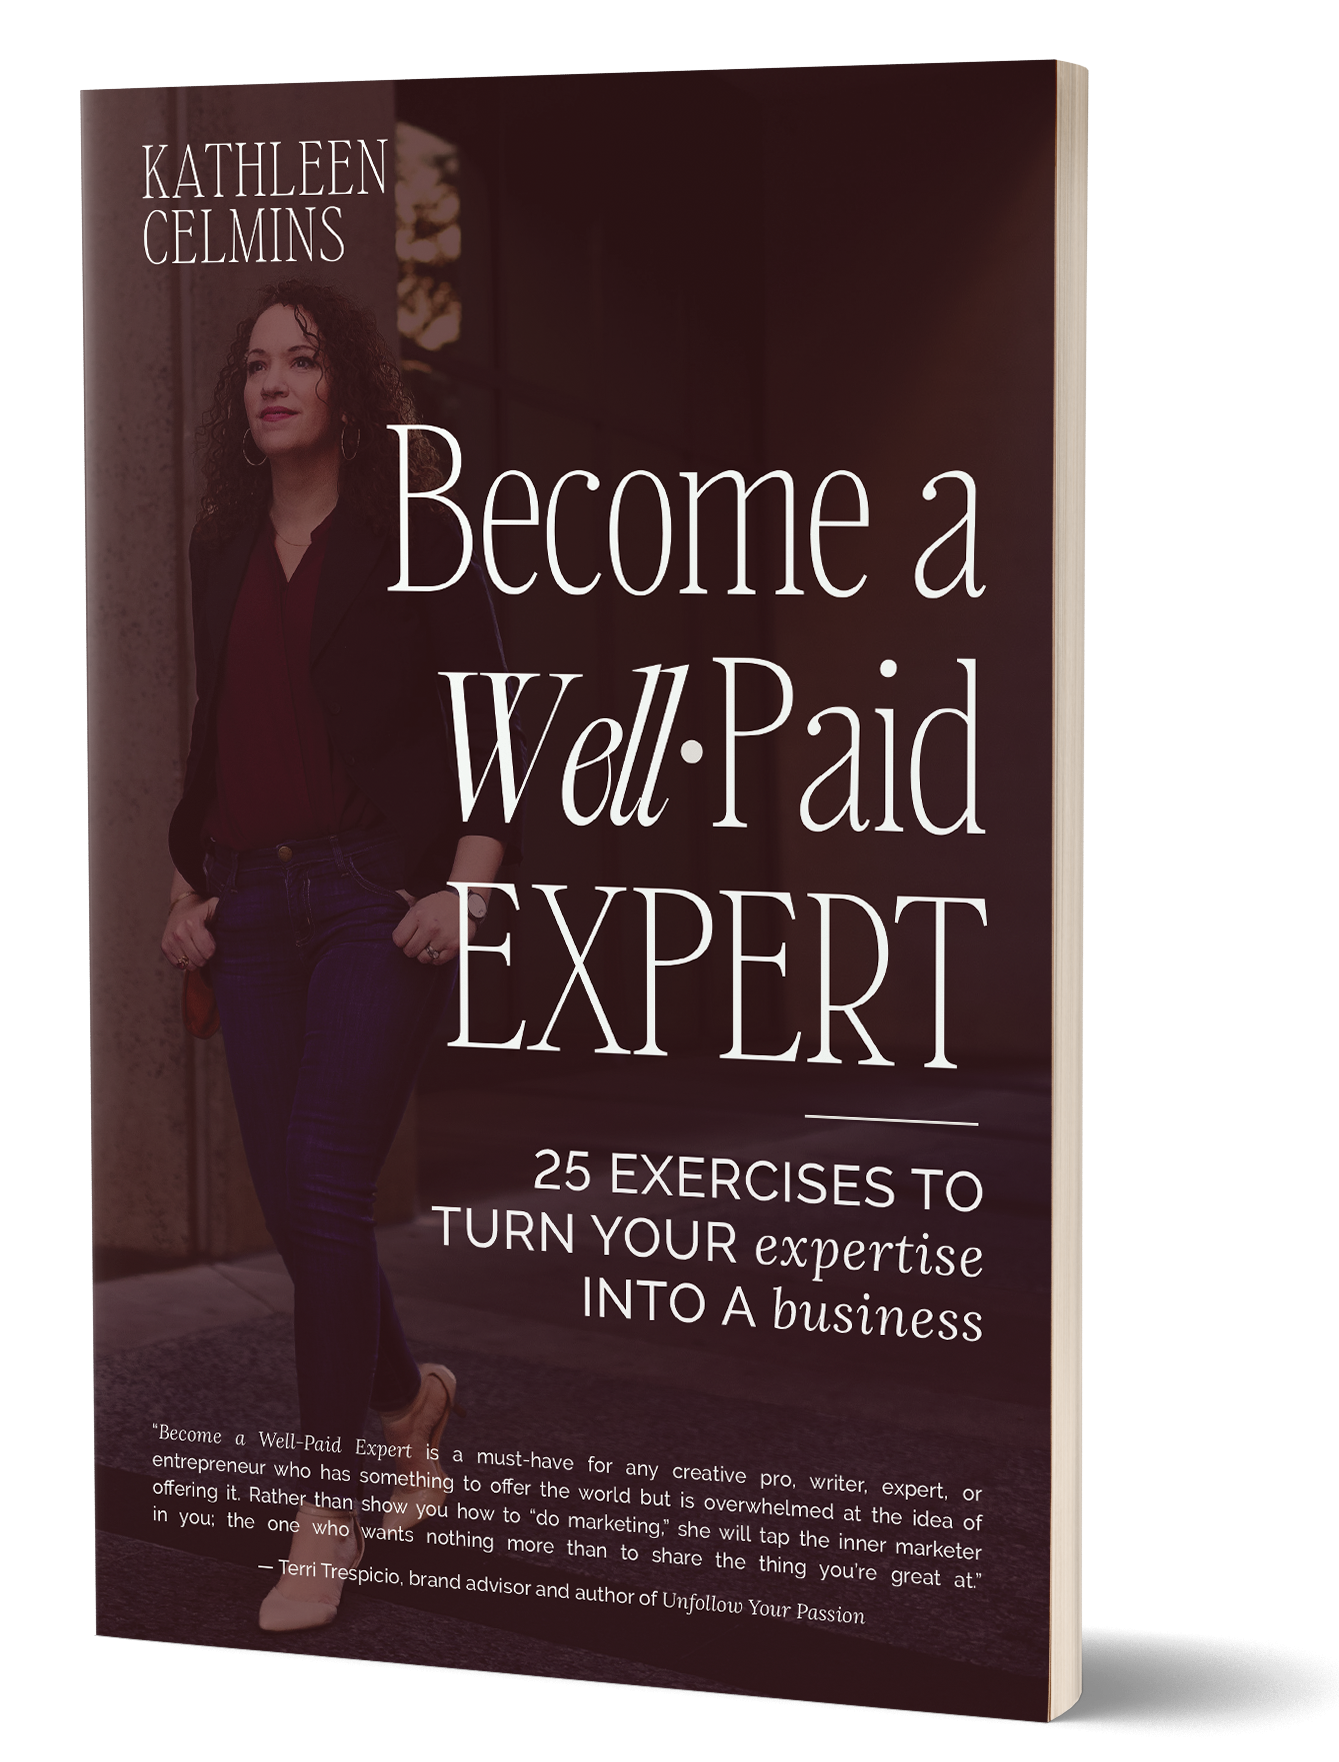 Become a Well-Paid Expert book cover